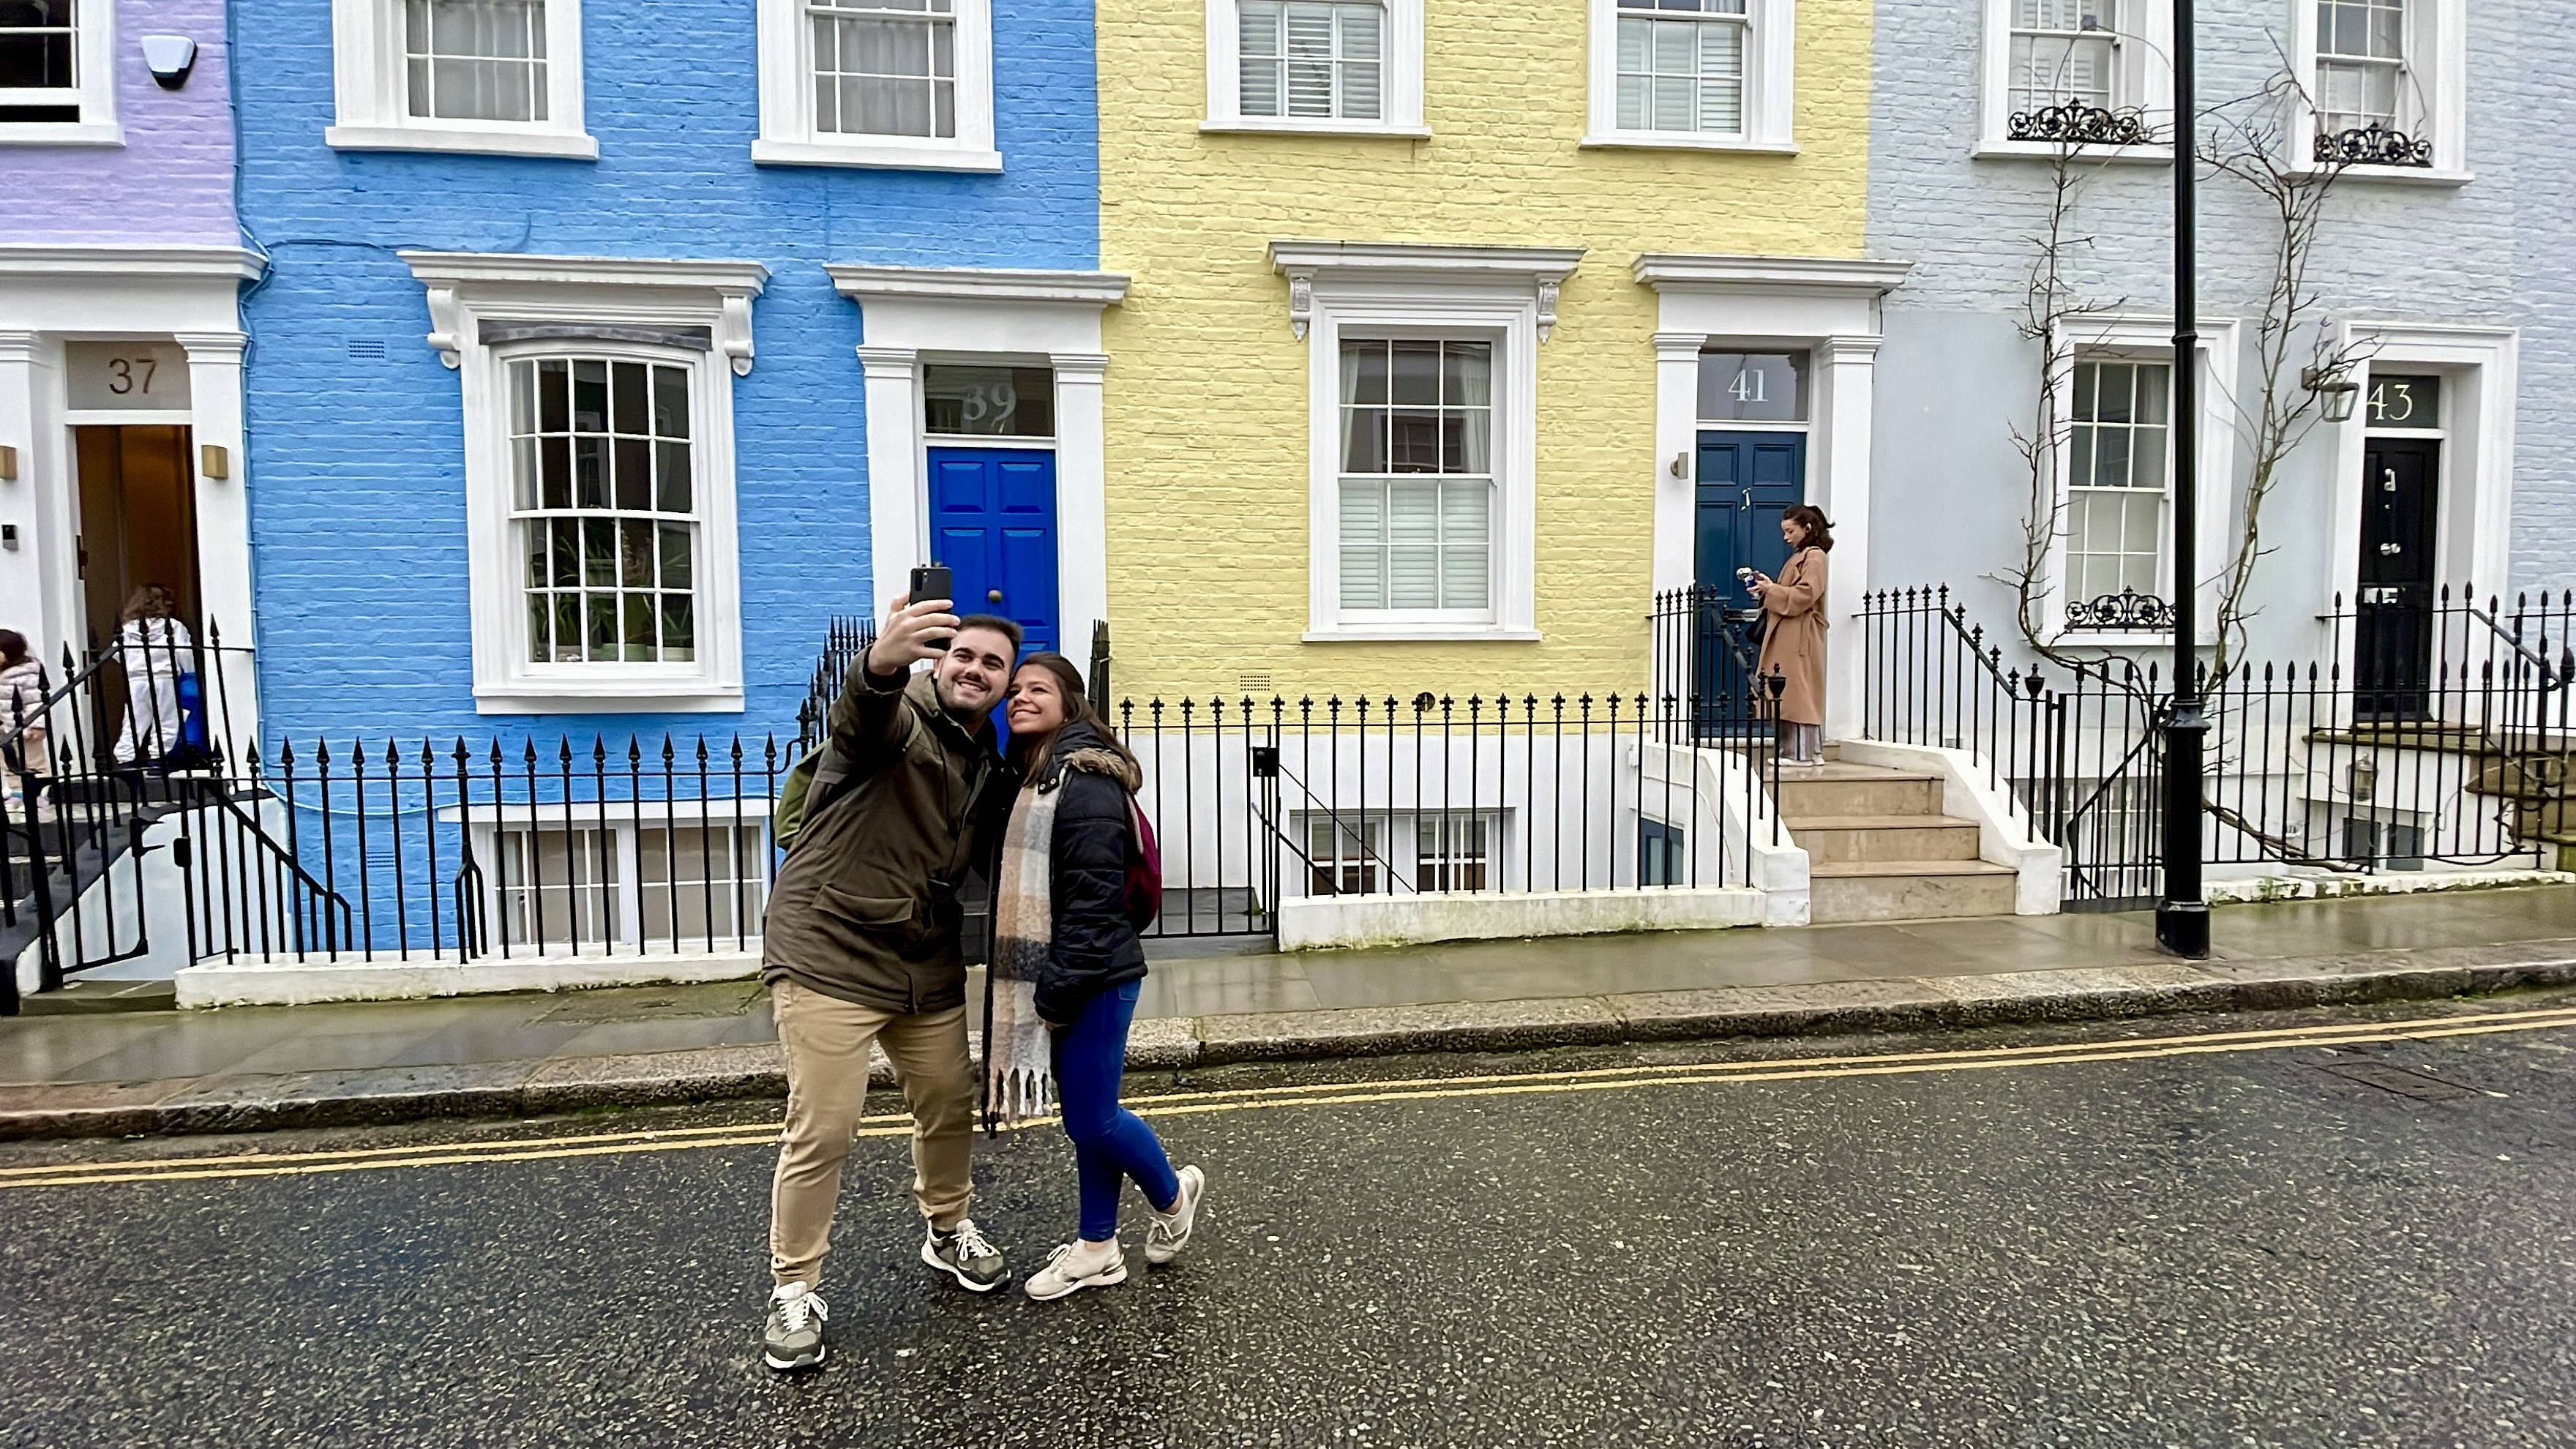 Goncalo (left) and Ana (right) from Portugal snap a photo in front of the Hillgate Village homes